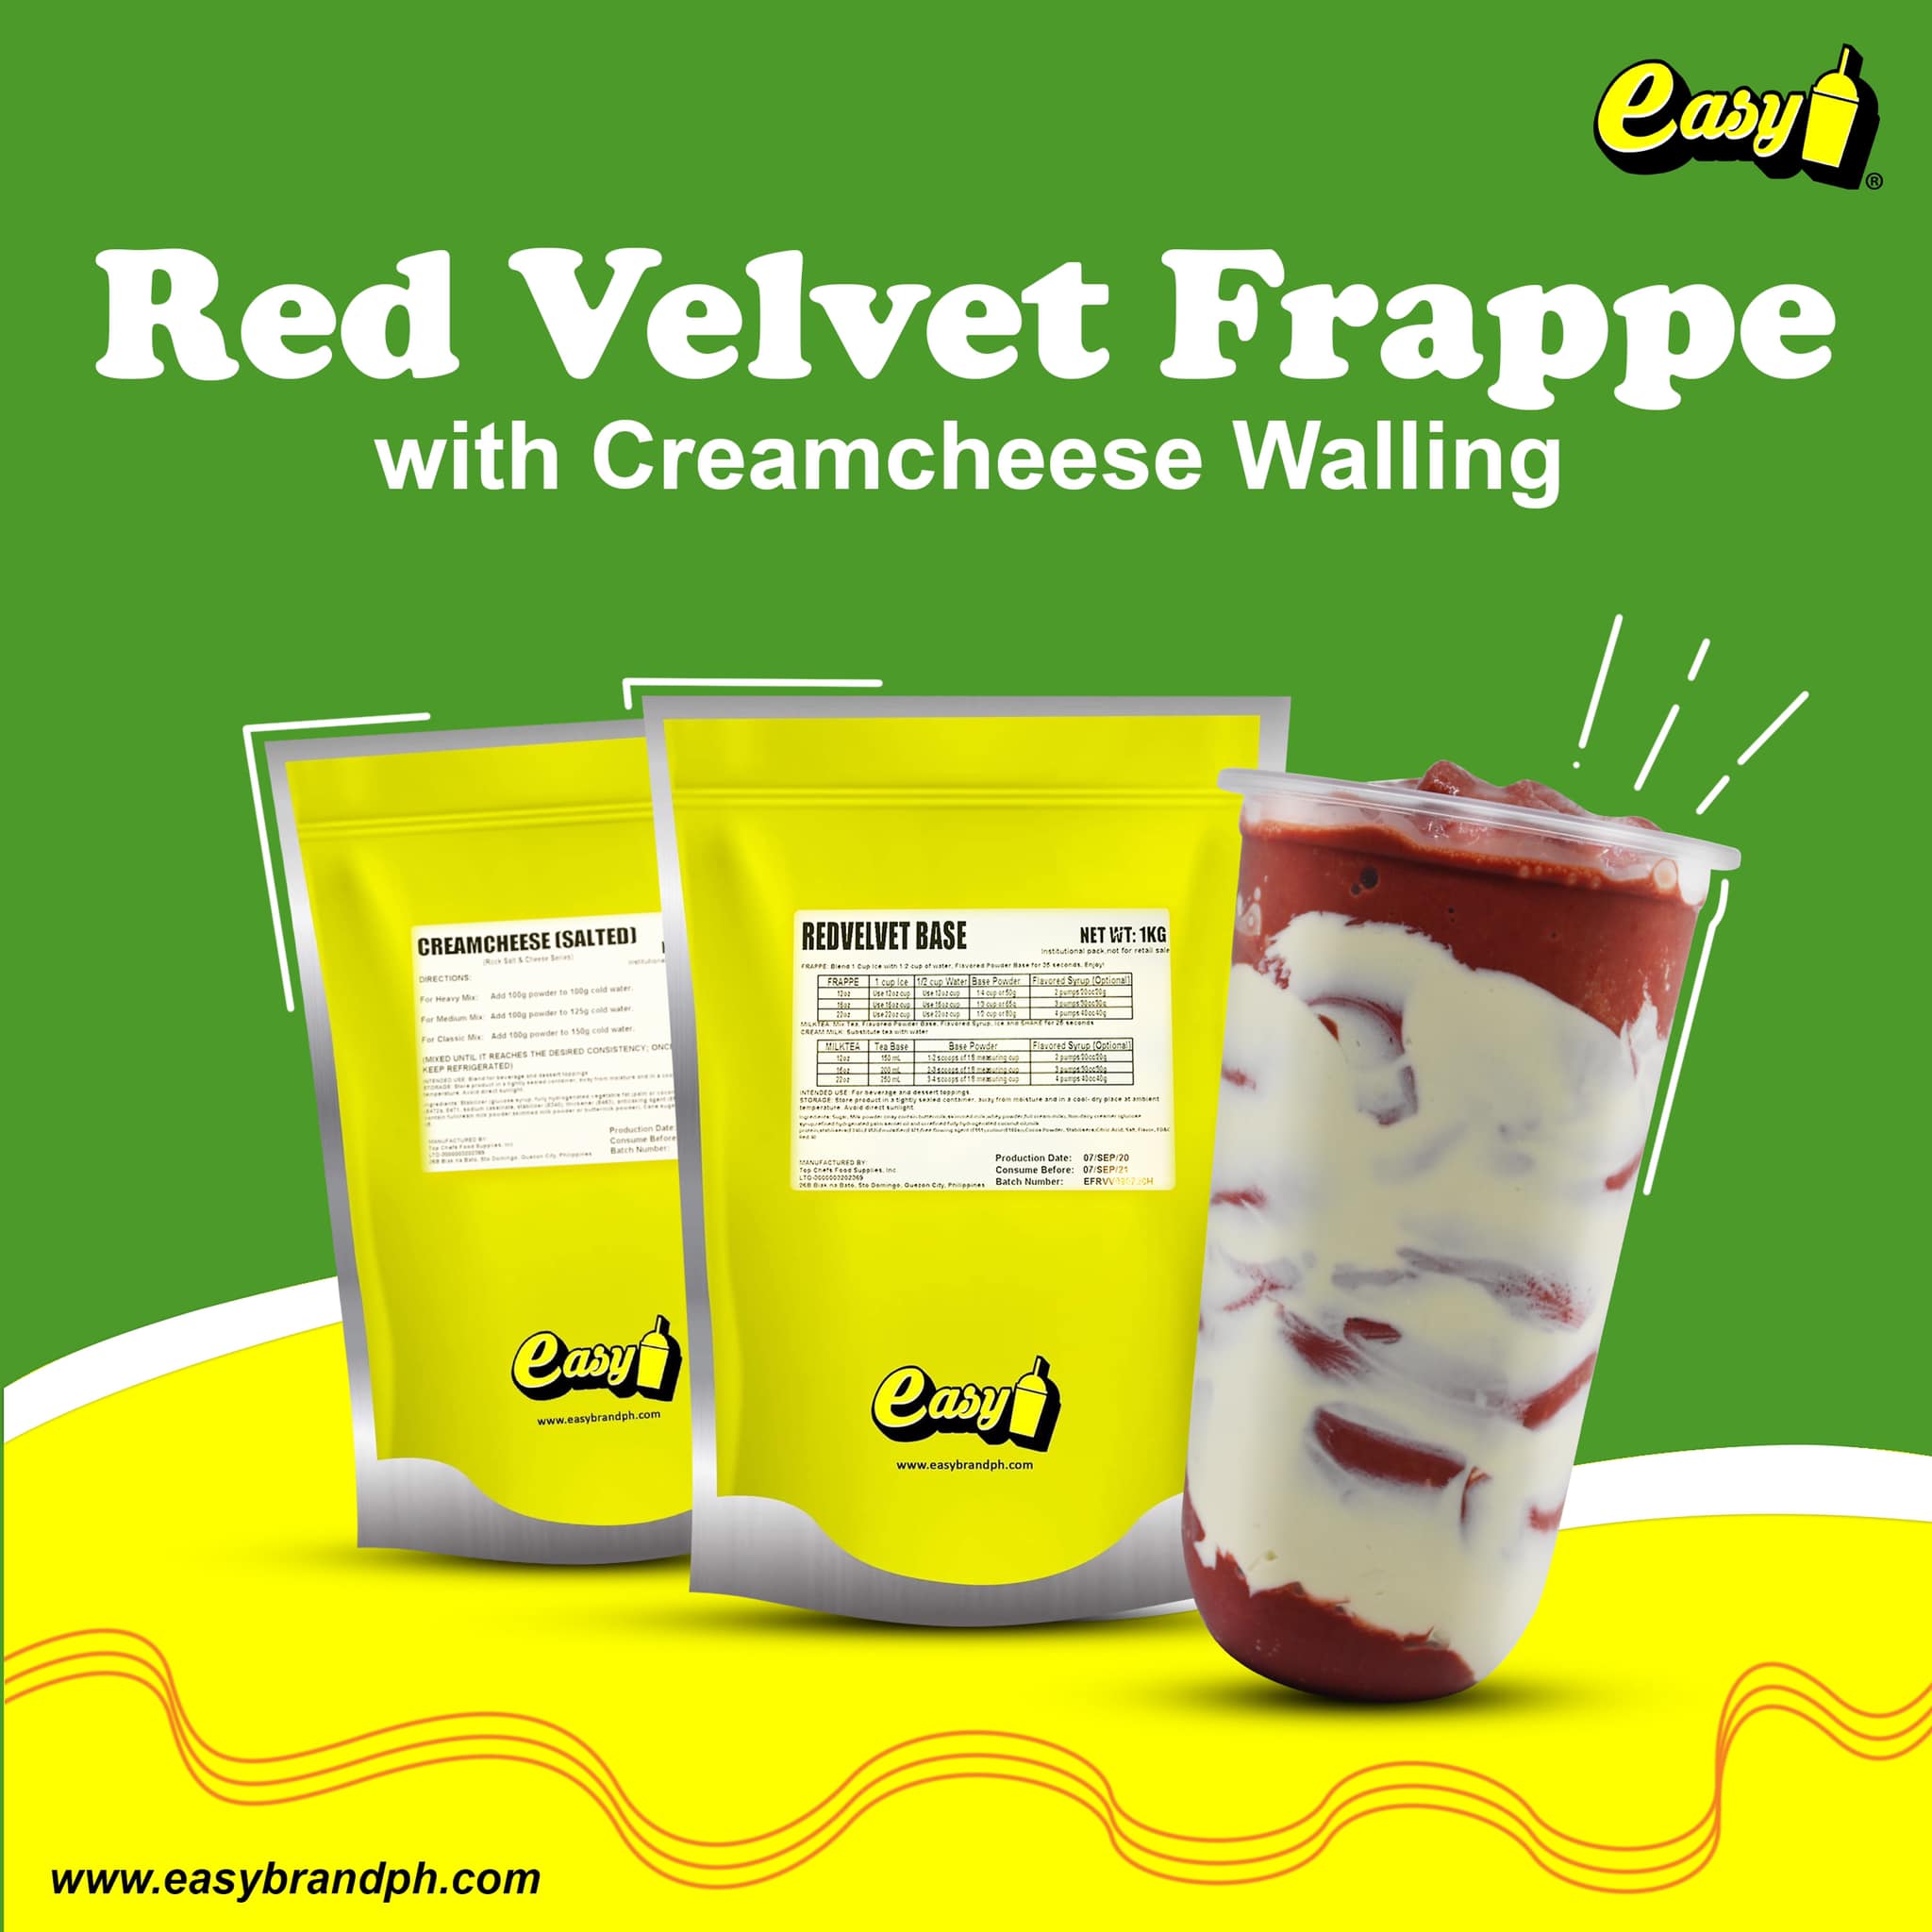 Red Velvet Frappe with Creamcheese Walling